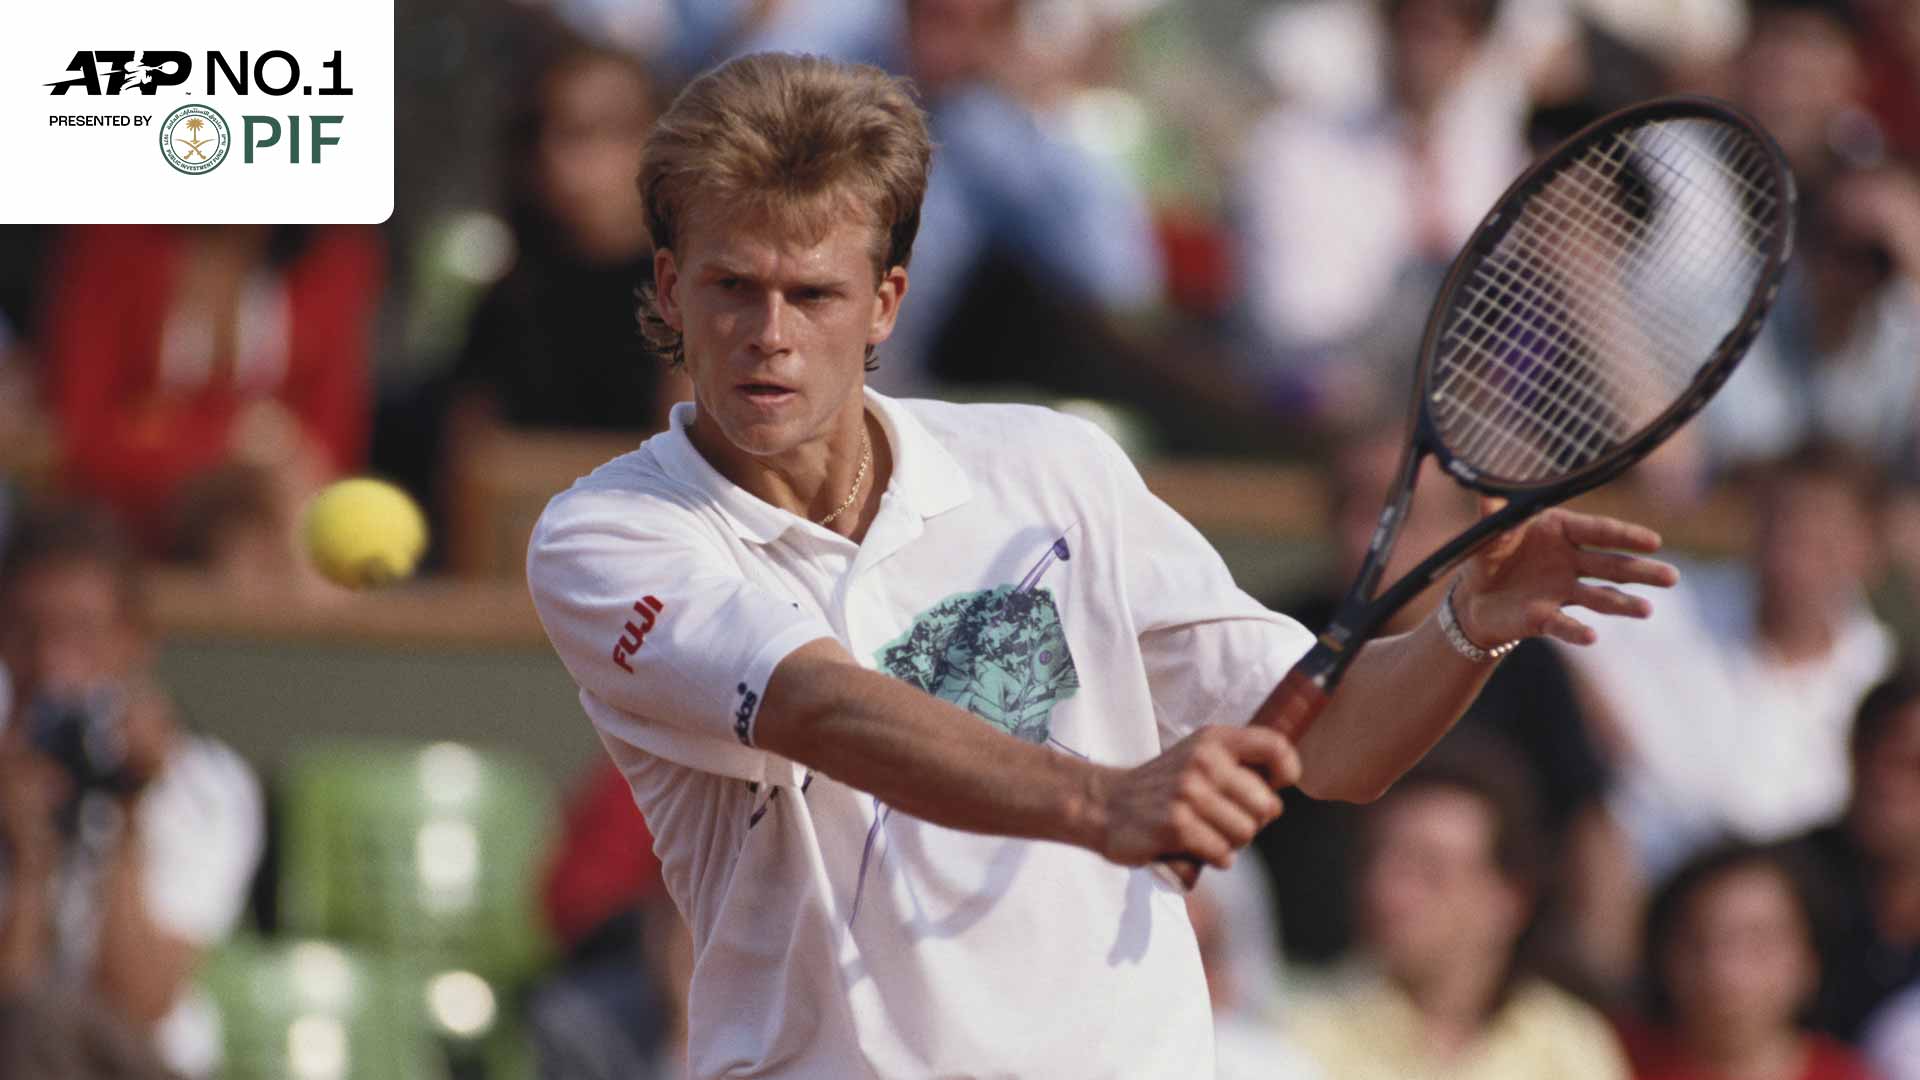 Stefan Edberg first reached No. 1 in the PIF ATP Rankings in 1990.